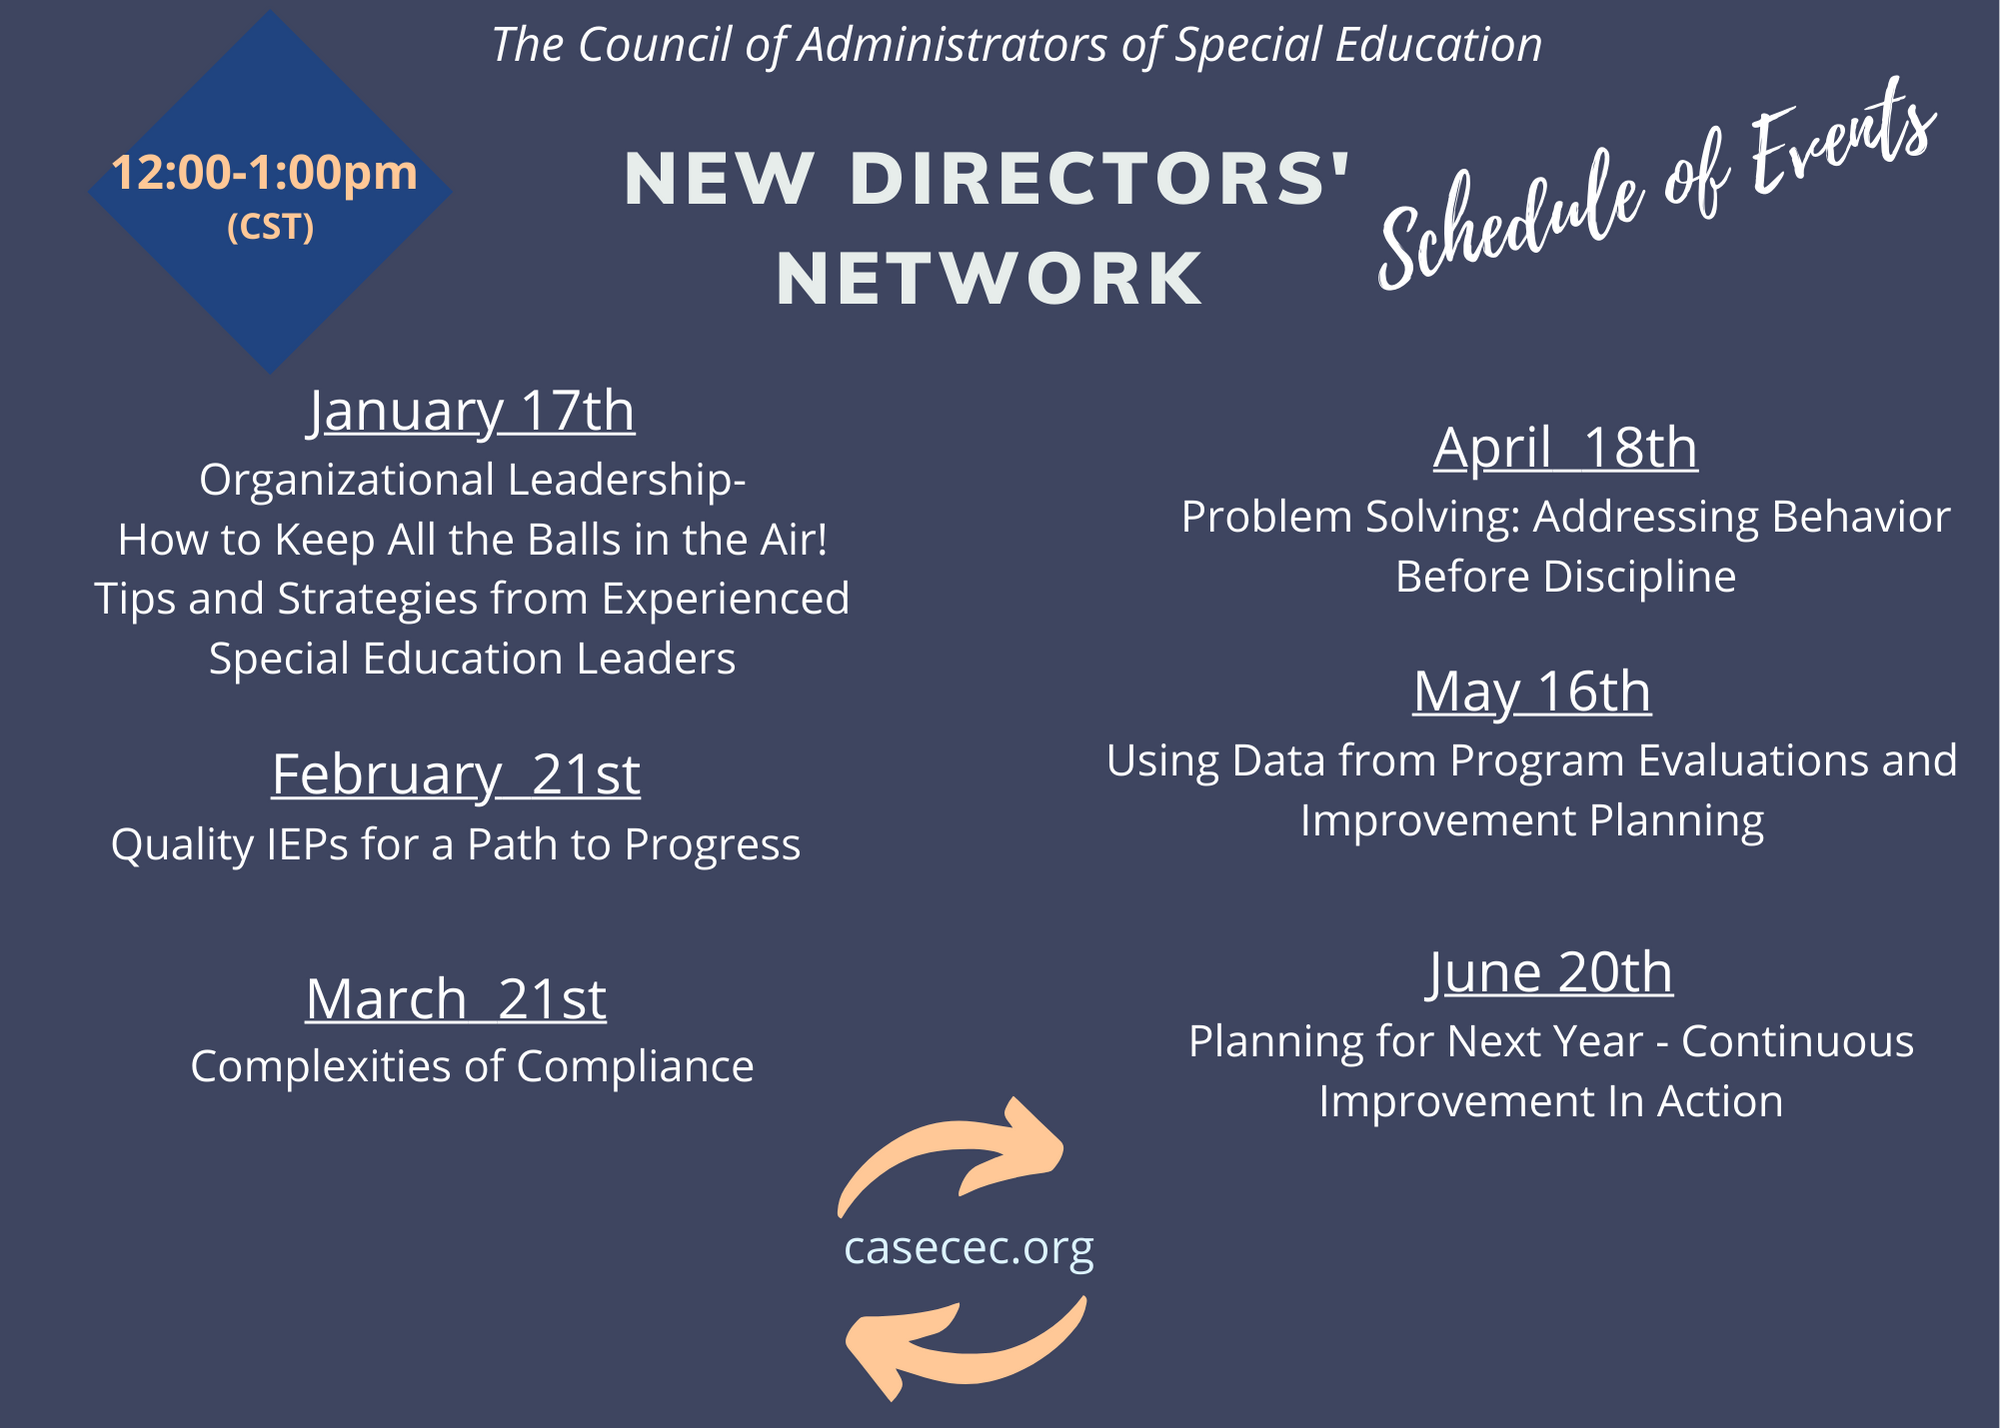 New Director Network